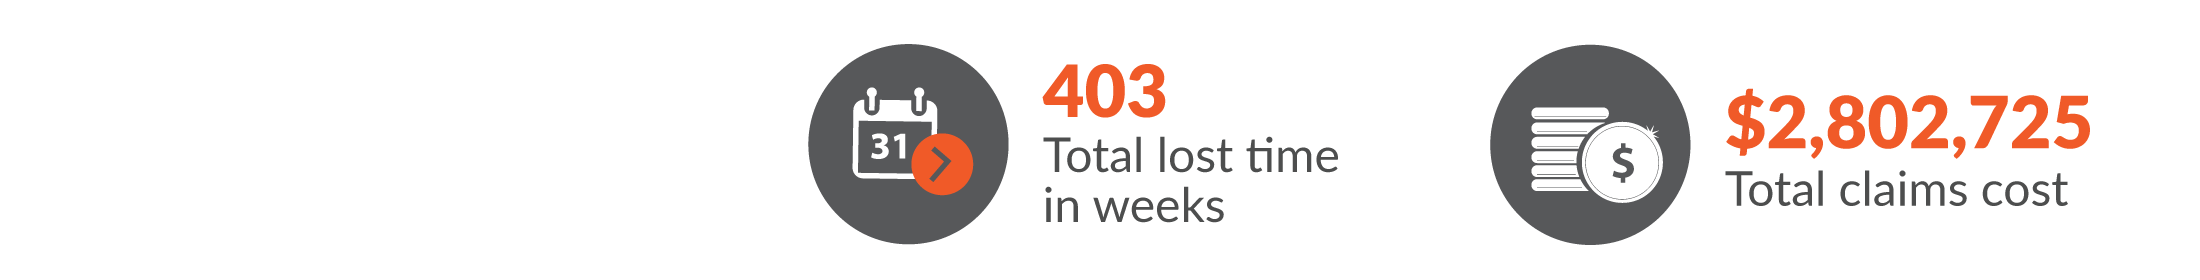 This infographic shows total workers compensation claims for Retail Trade resulted in 403 total lost time in weeks and $2,802,725 was paid in benefits.